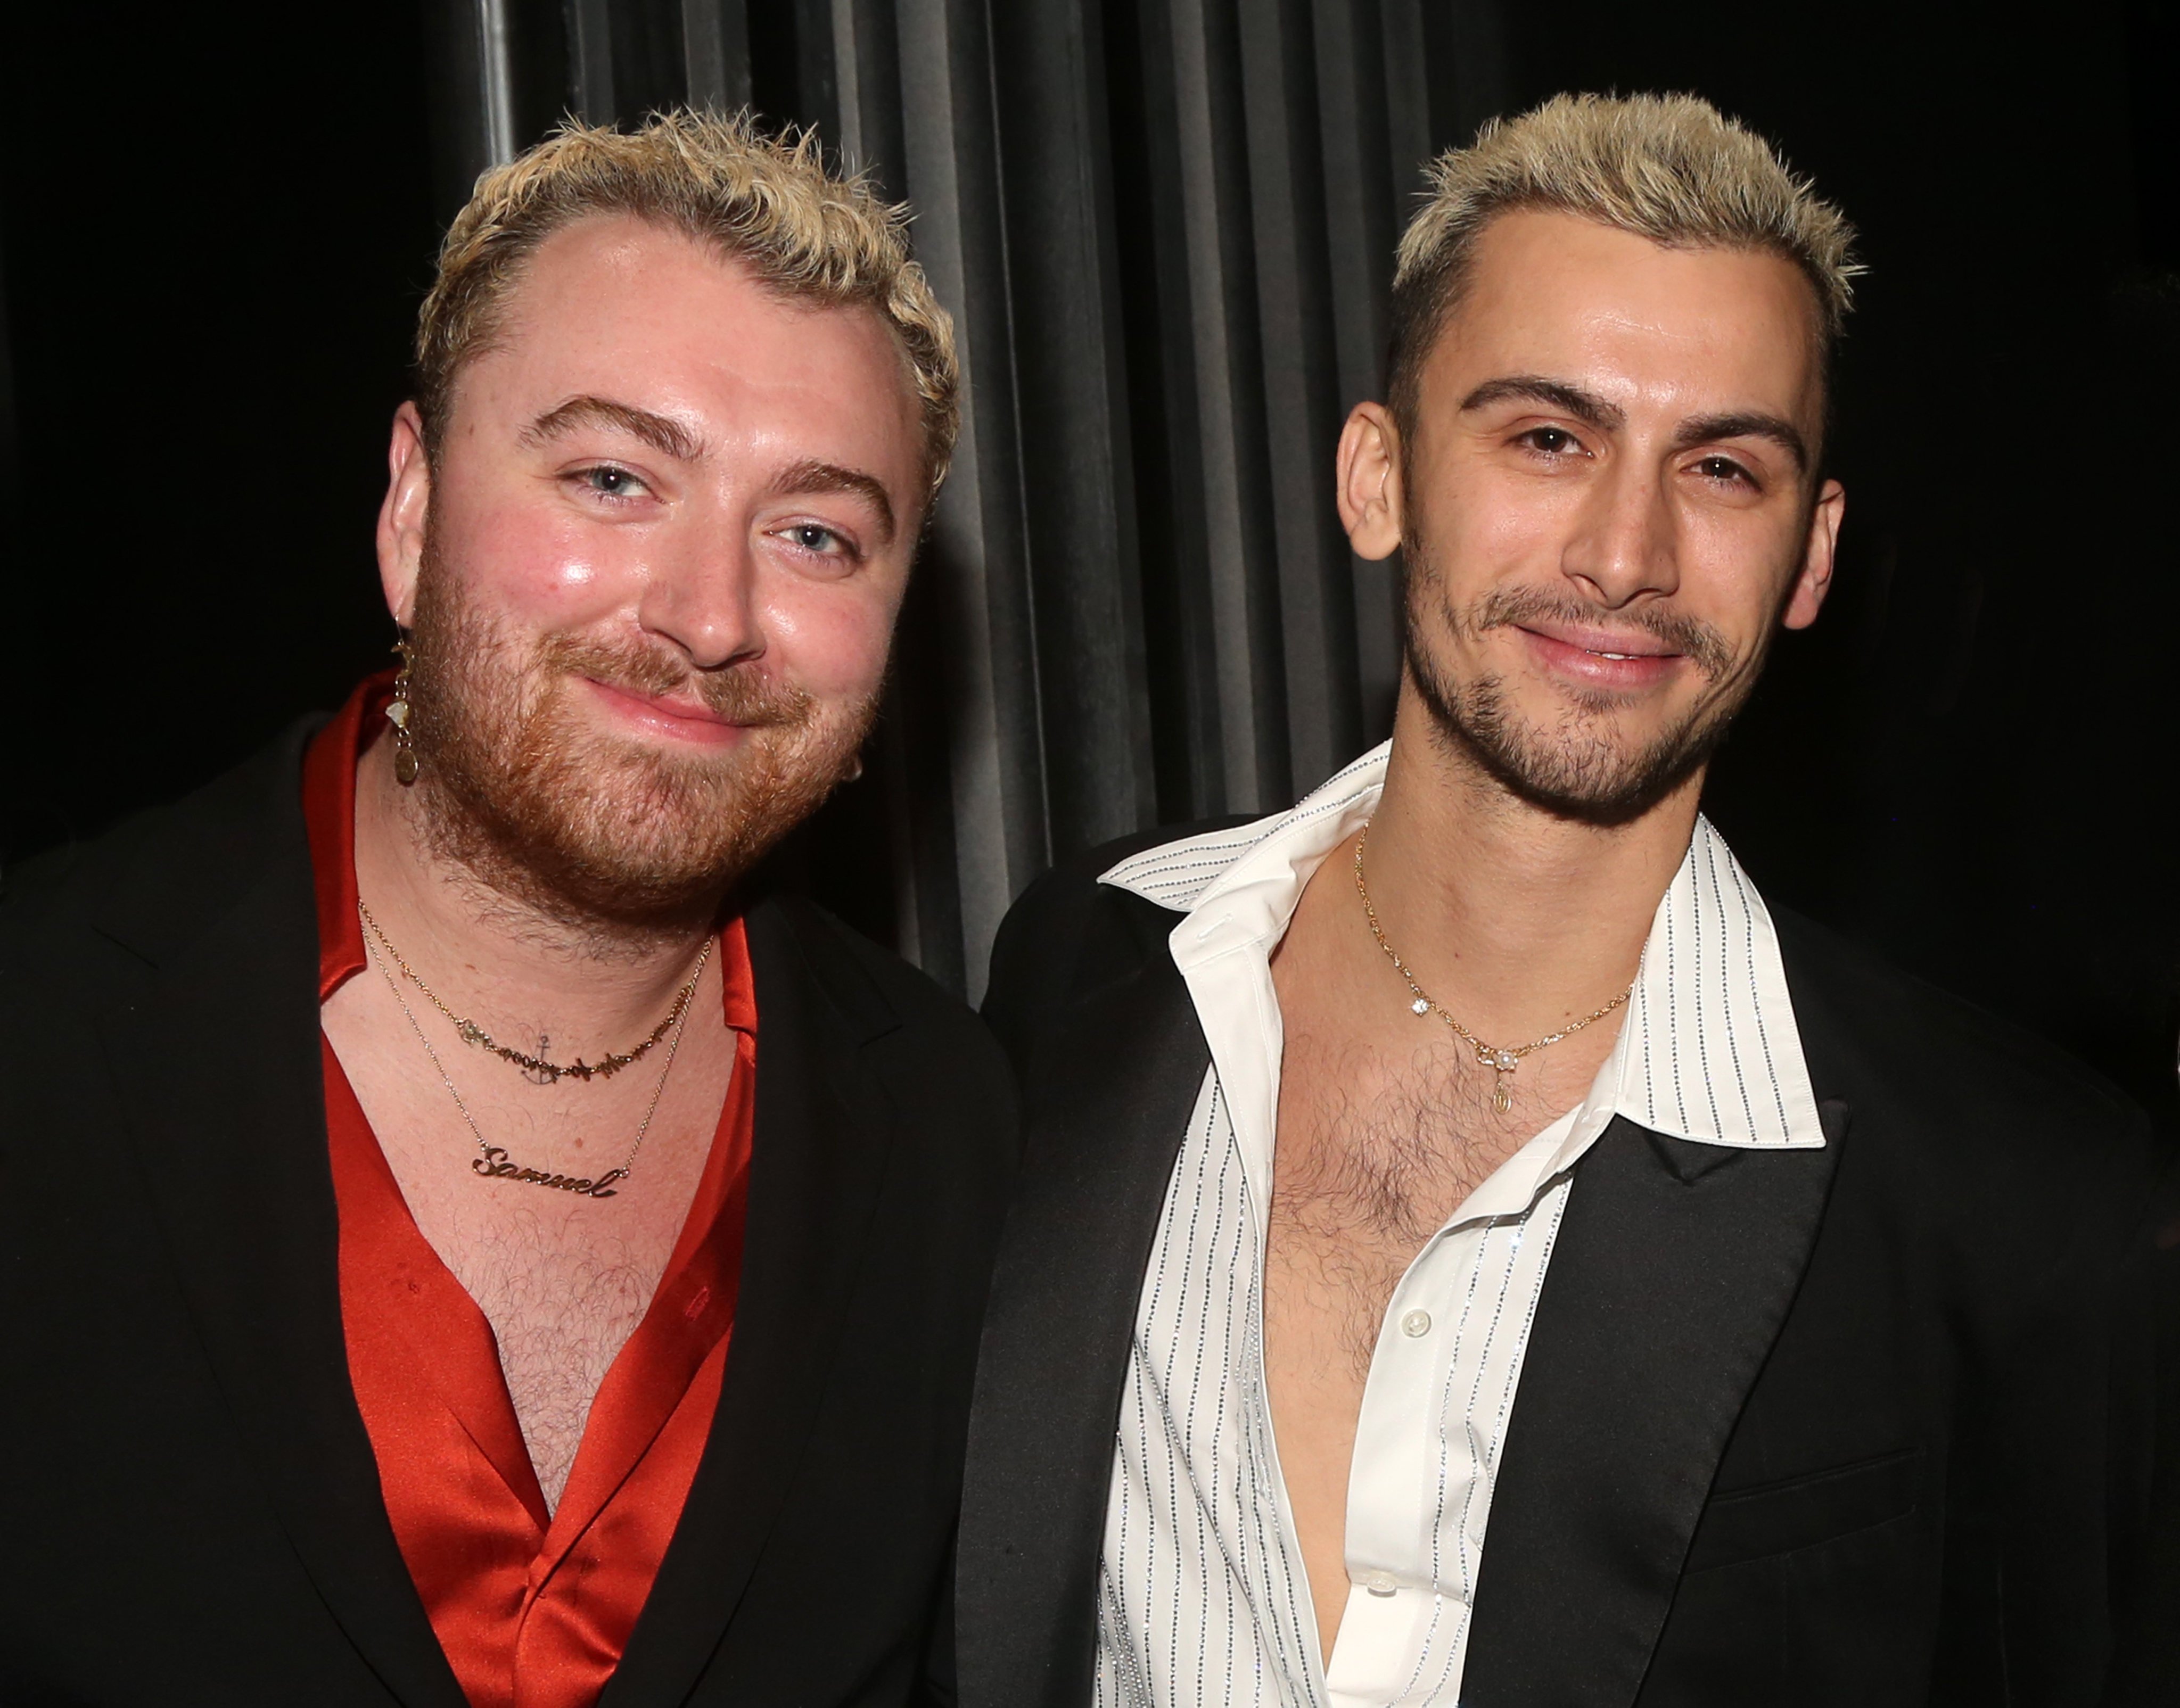 Sam Smith and partner Christian Cowan attended a Broadway show together in New York last month. Photo: Getty Images